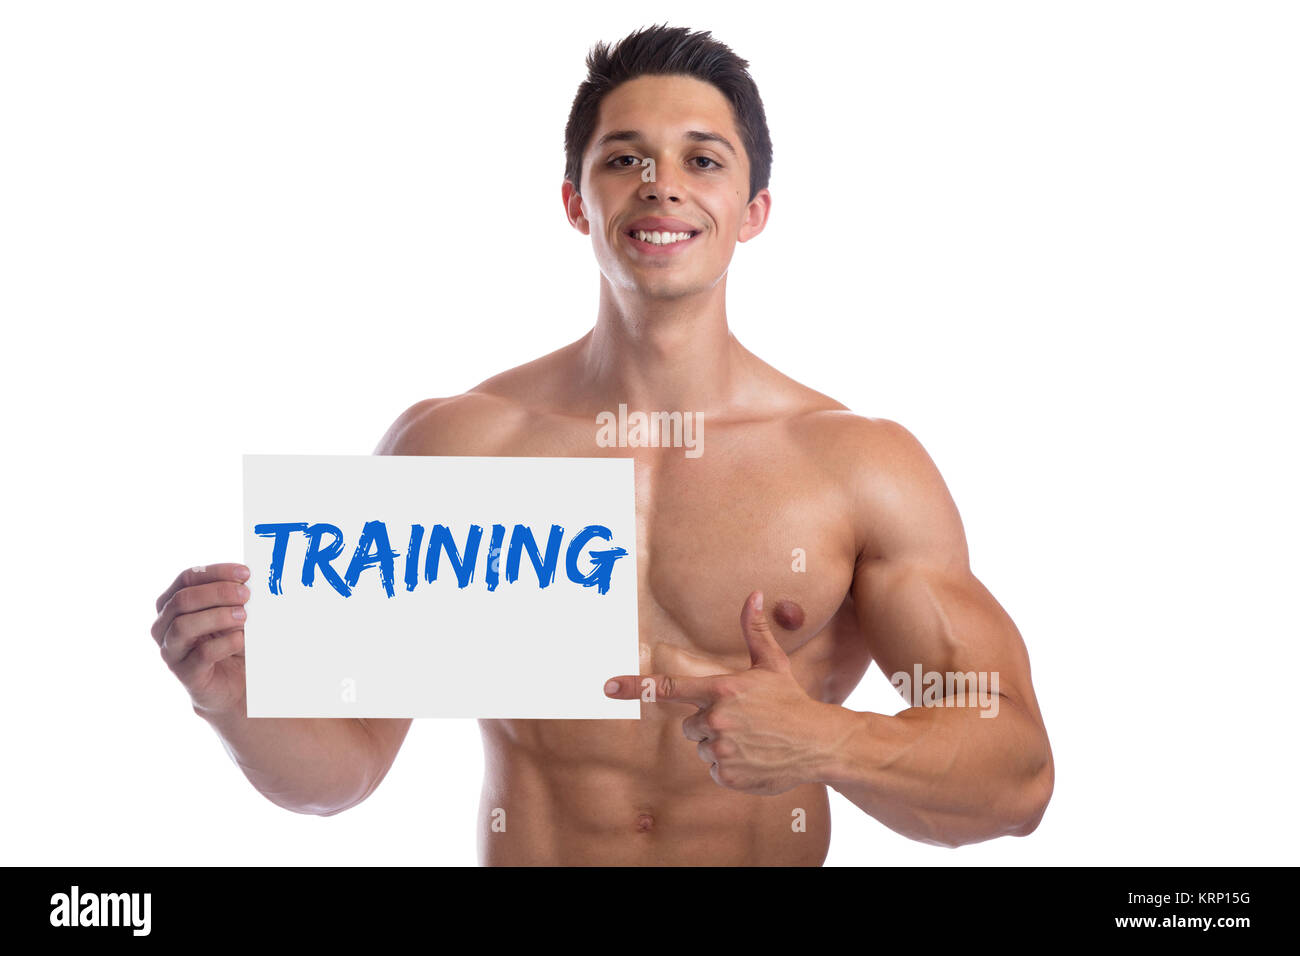 bodybuilding bodybuilder muscles shield training body building man strong muscular young cut Stock Photo